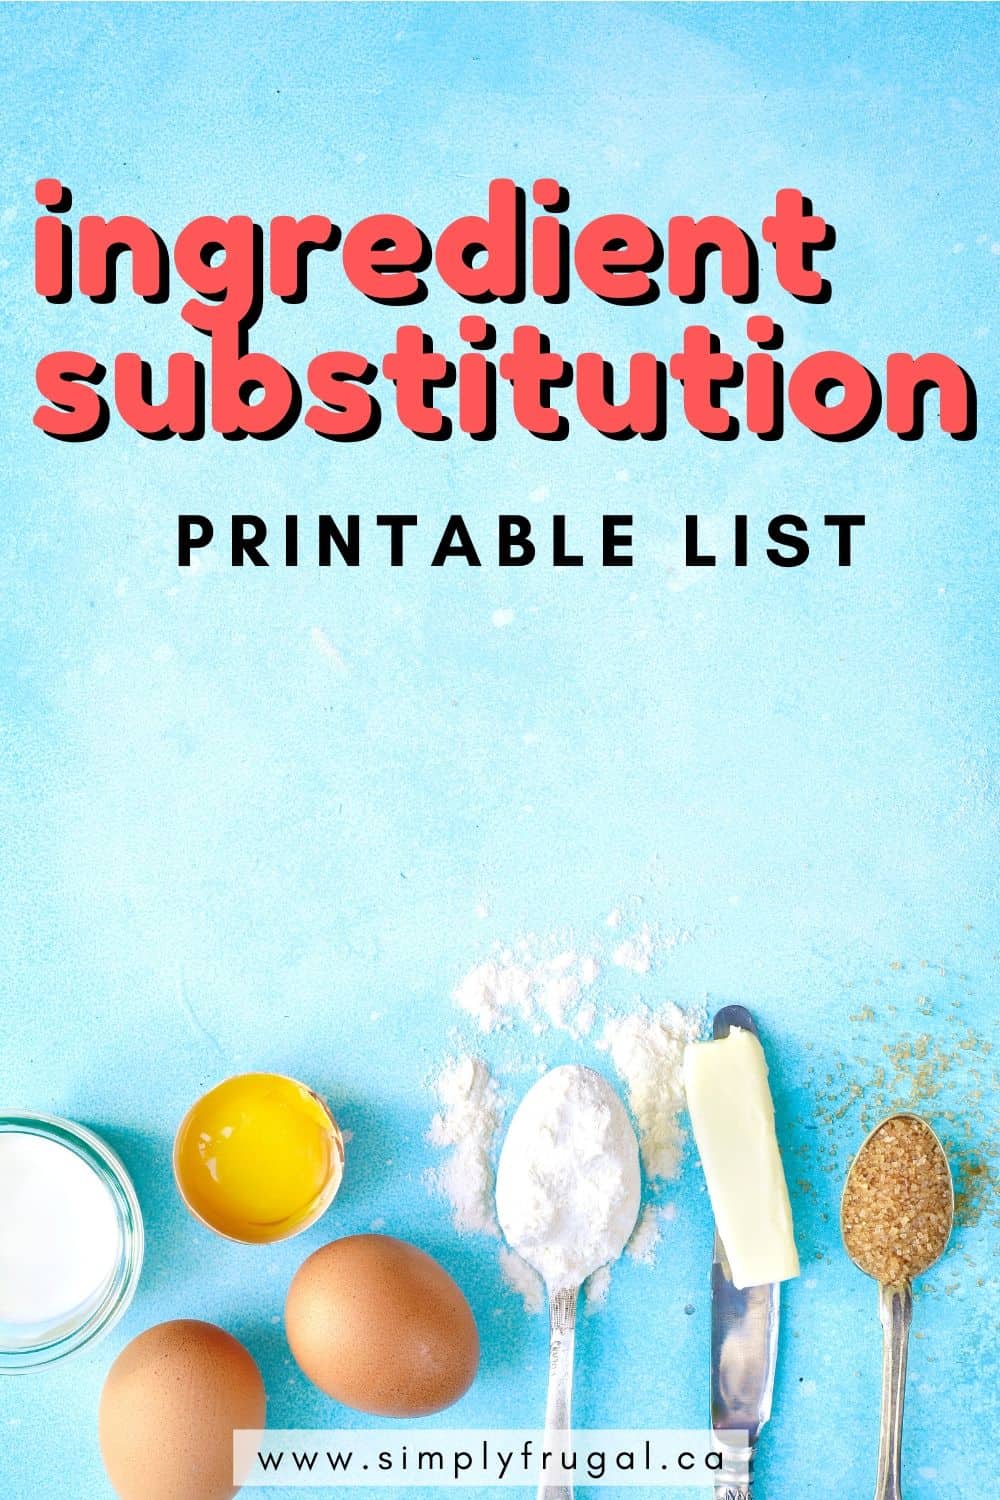 Don't let your recipes get thwarted by a missing ingredient – use one of these easy substitutions instead!